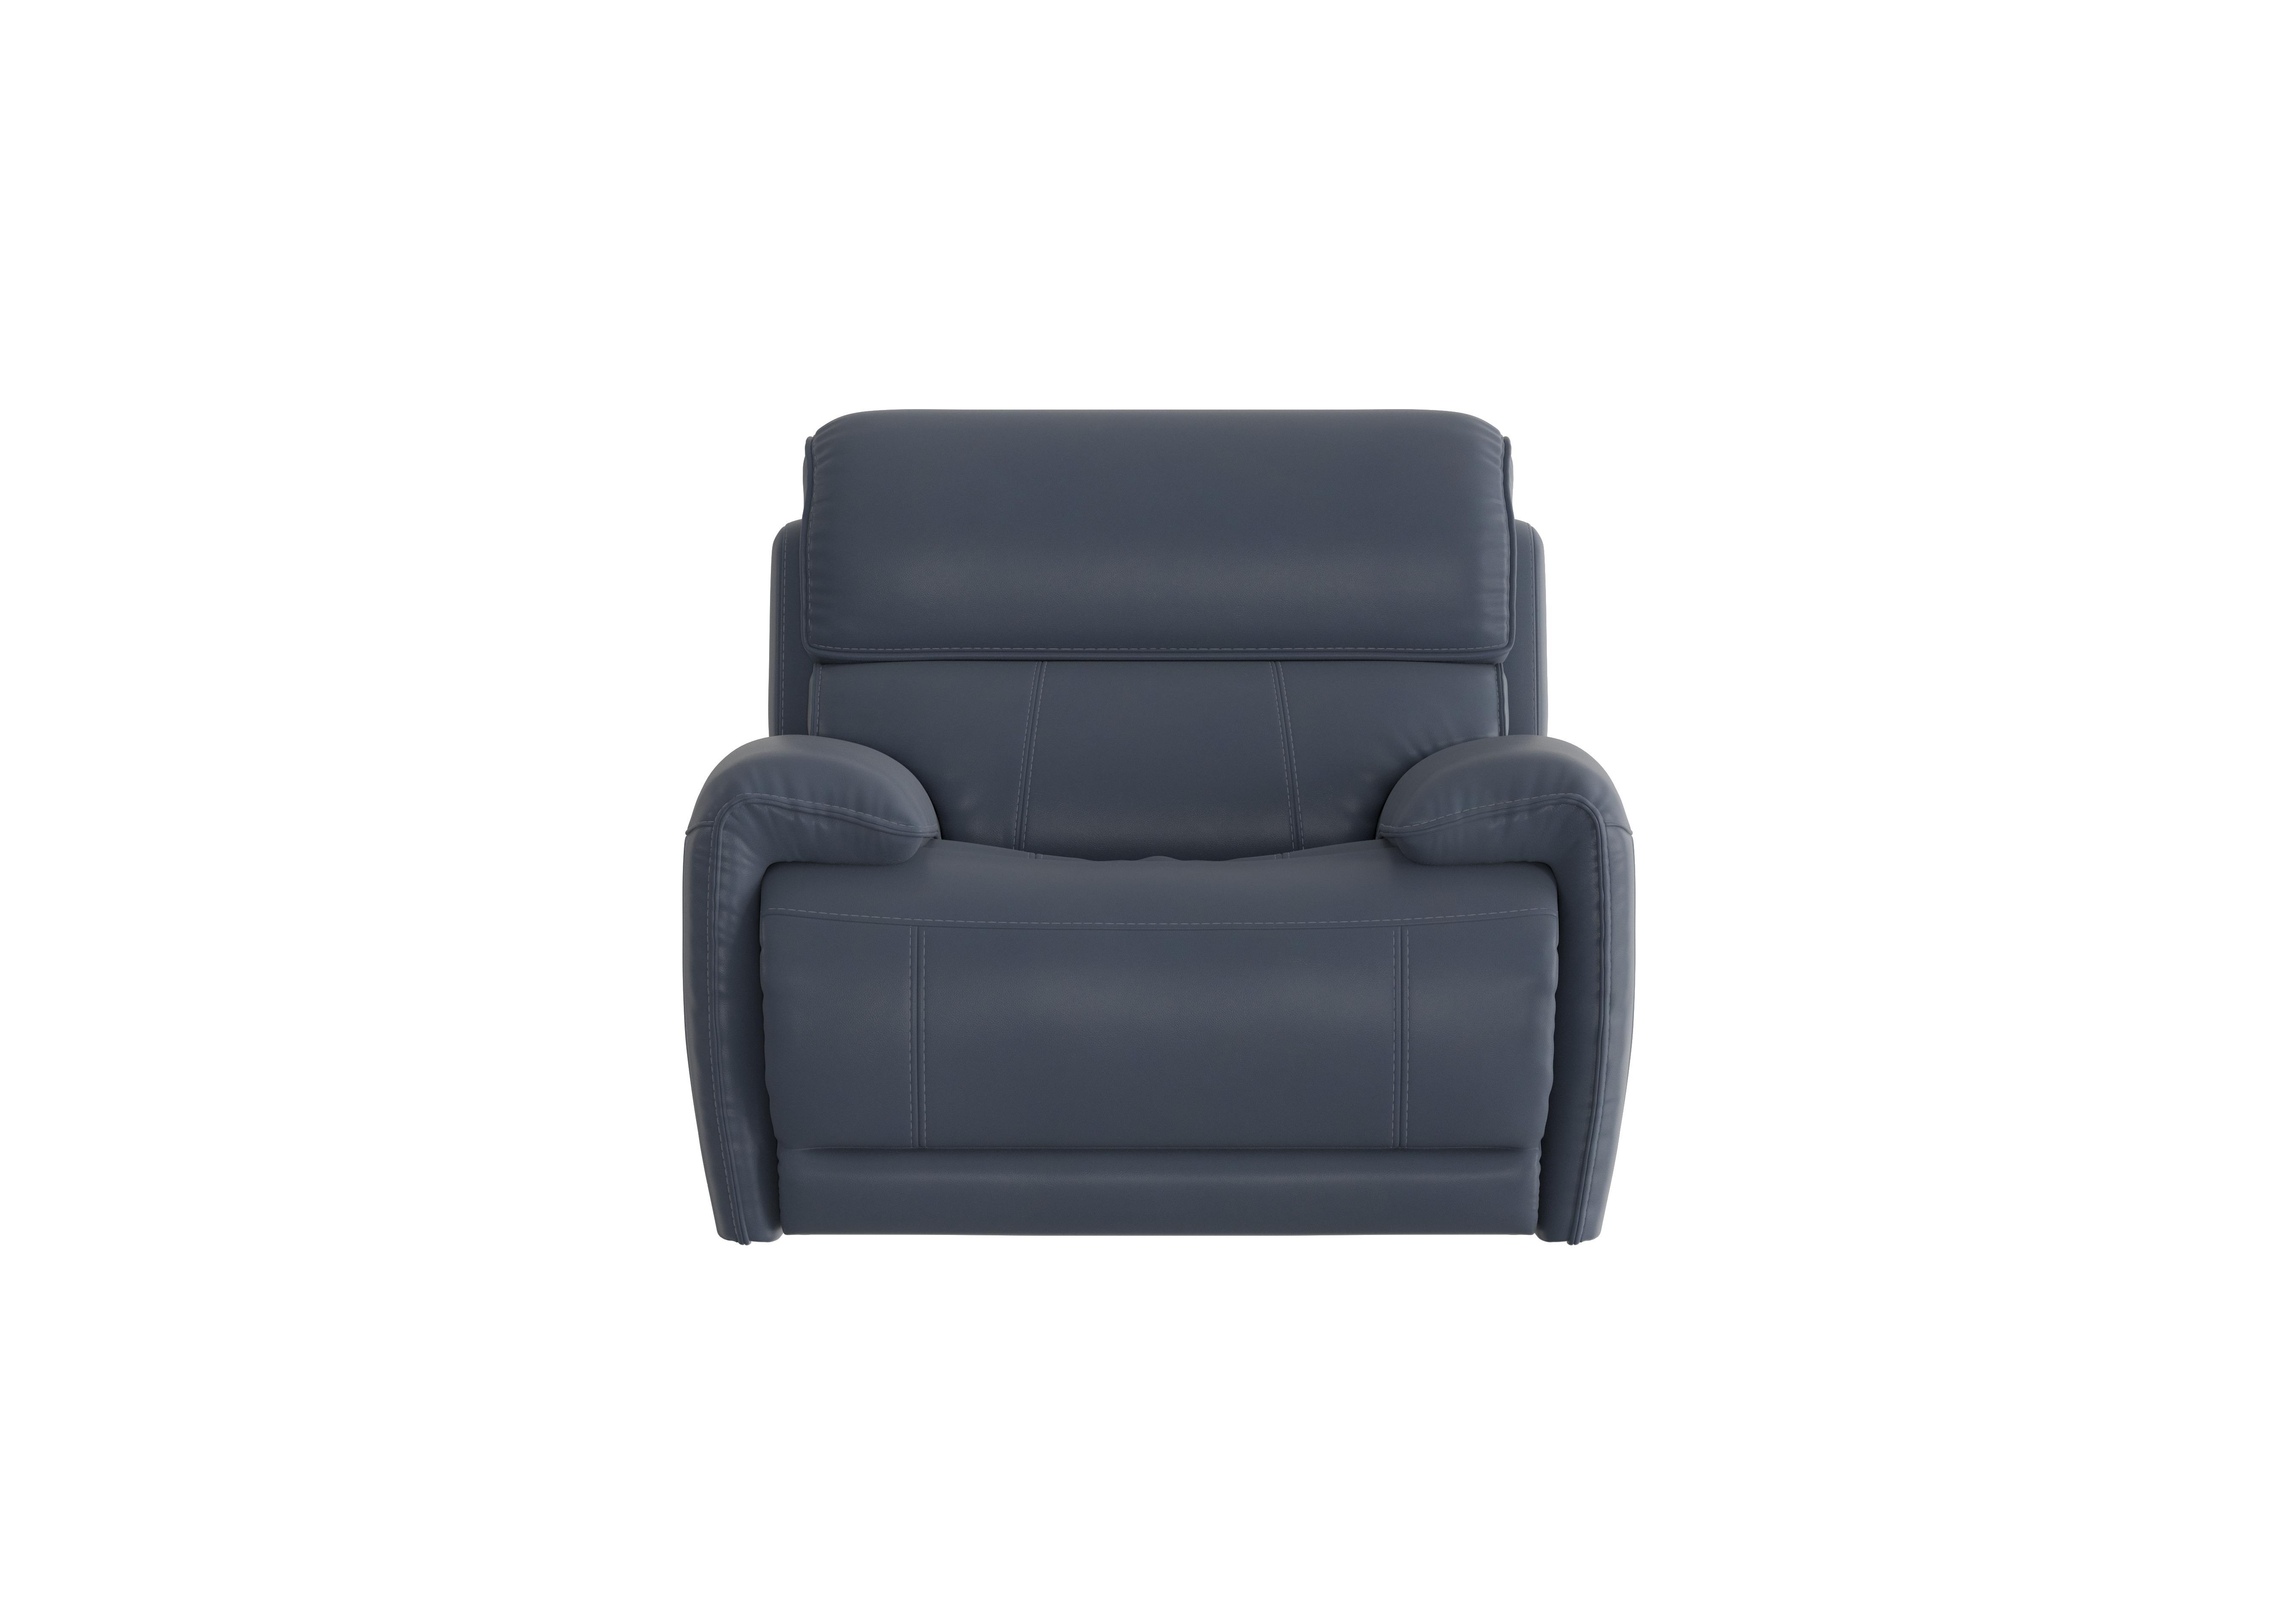 Link Leather Power Recliner Armchair with Power Headrest in Bv-313e Ocean Blue on Furniture Village